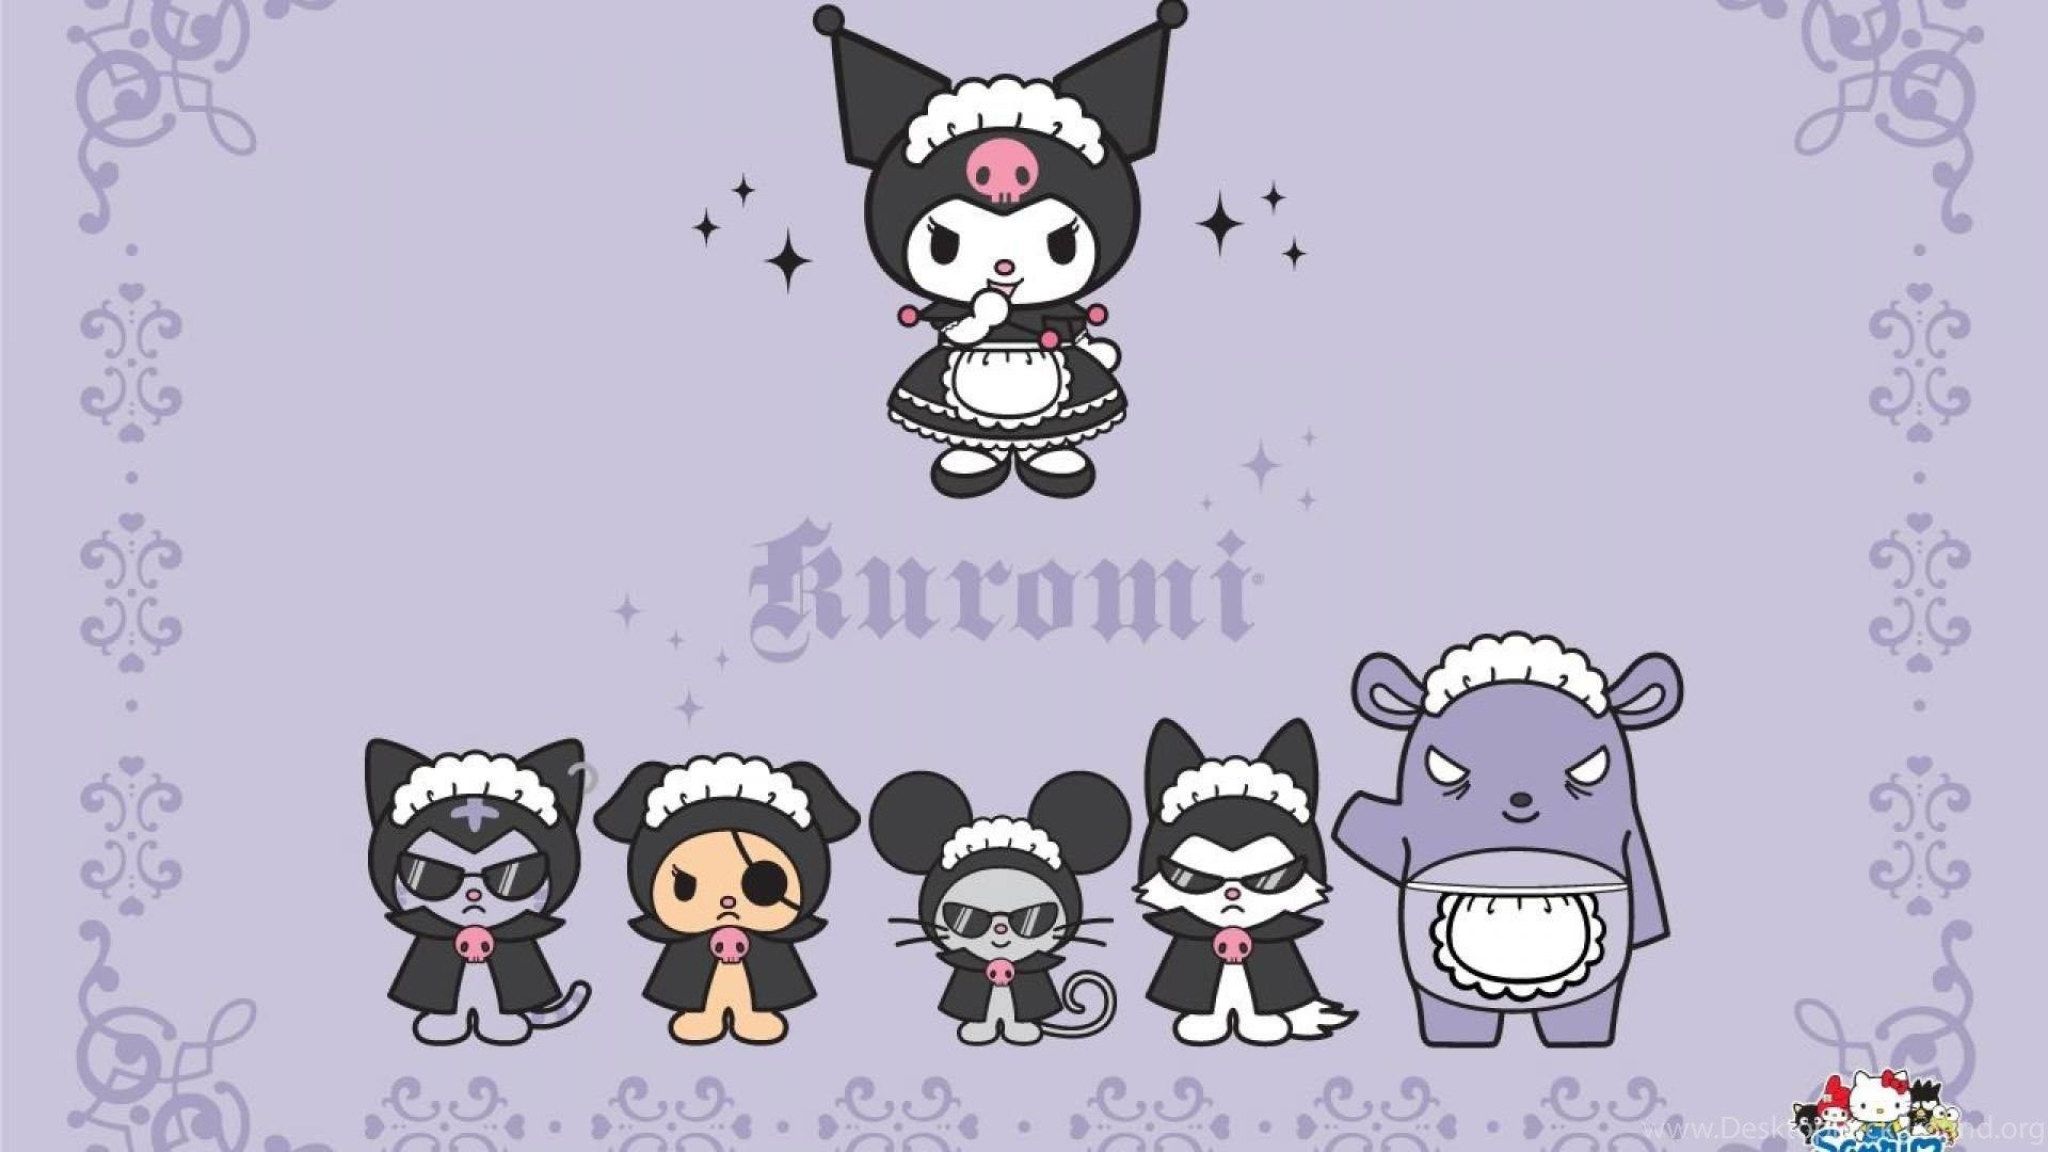 Kuromi and friends are dressed as maids for the new Sanrio character collection. - Kuromi, Sanrio, gothic